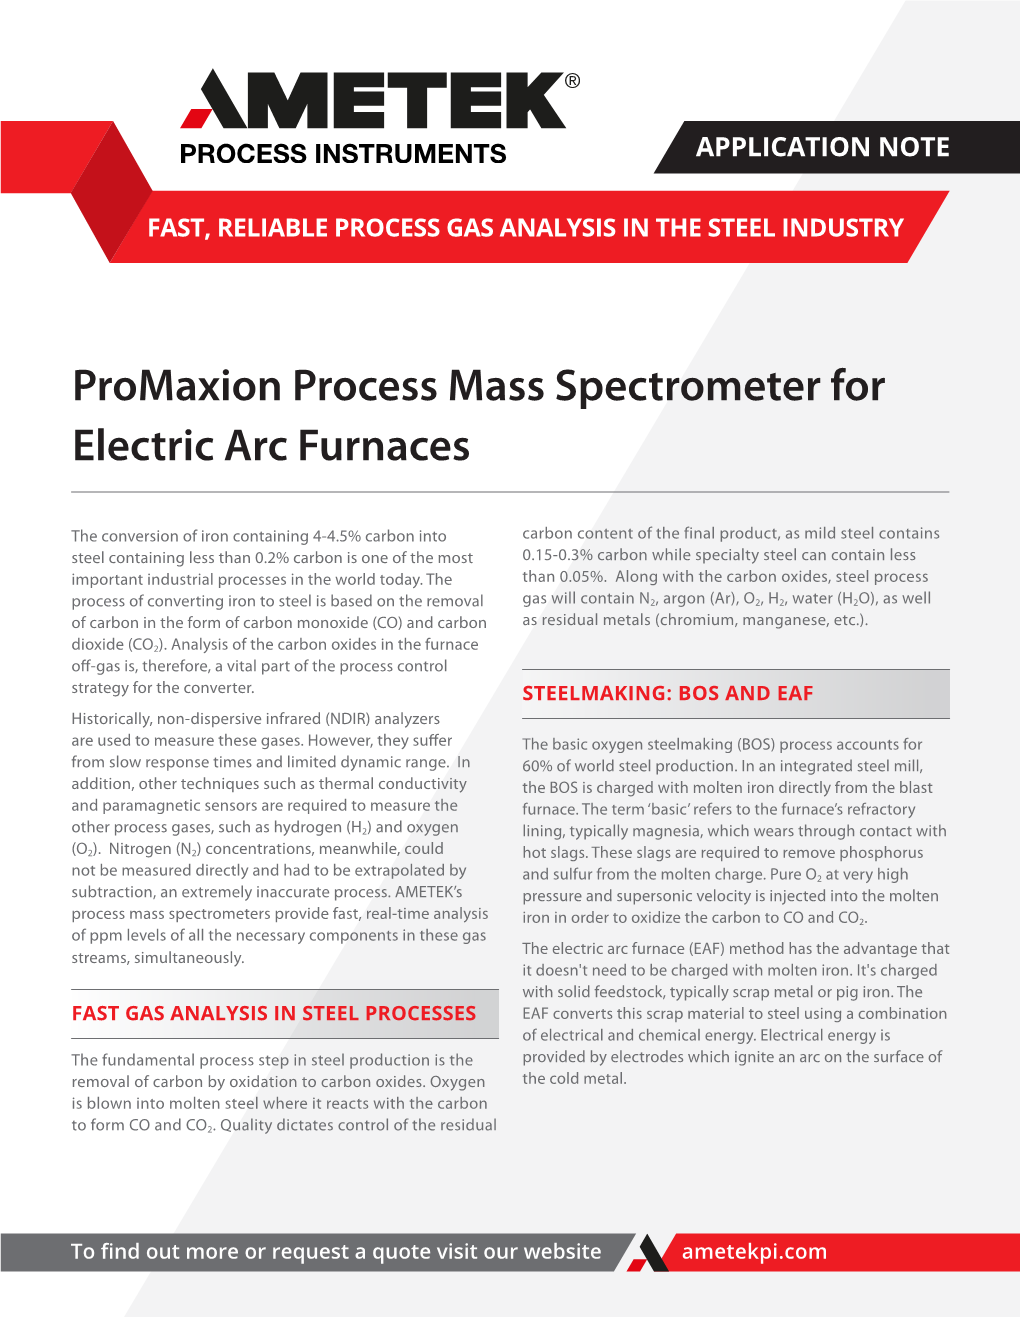 Promaxion Process Mass Spectrometer for Electric Arc Furnaces